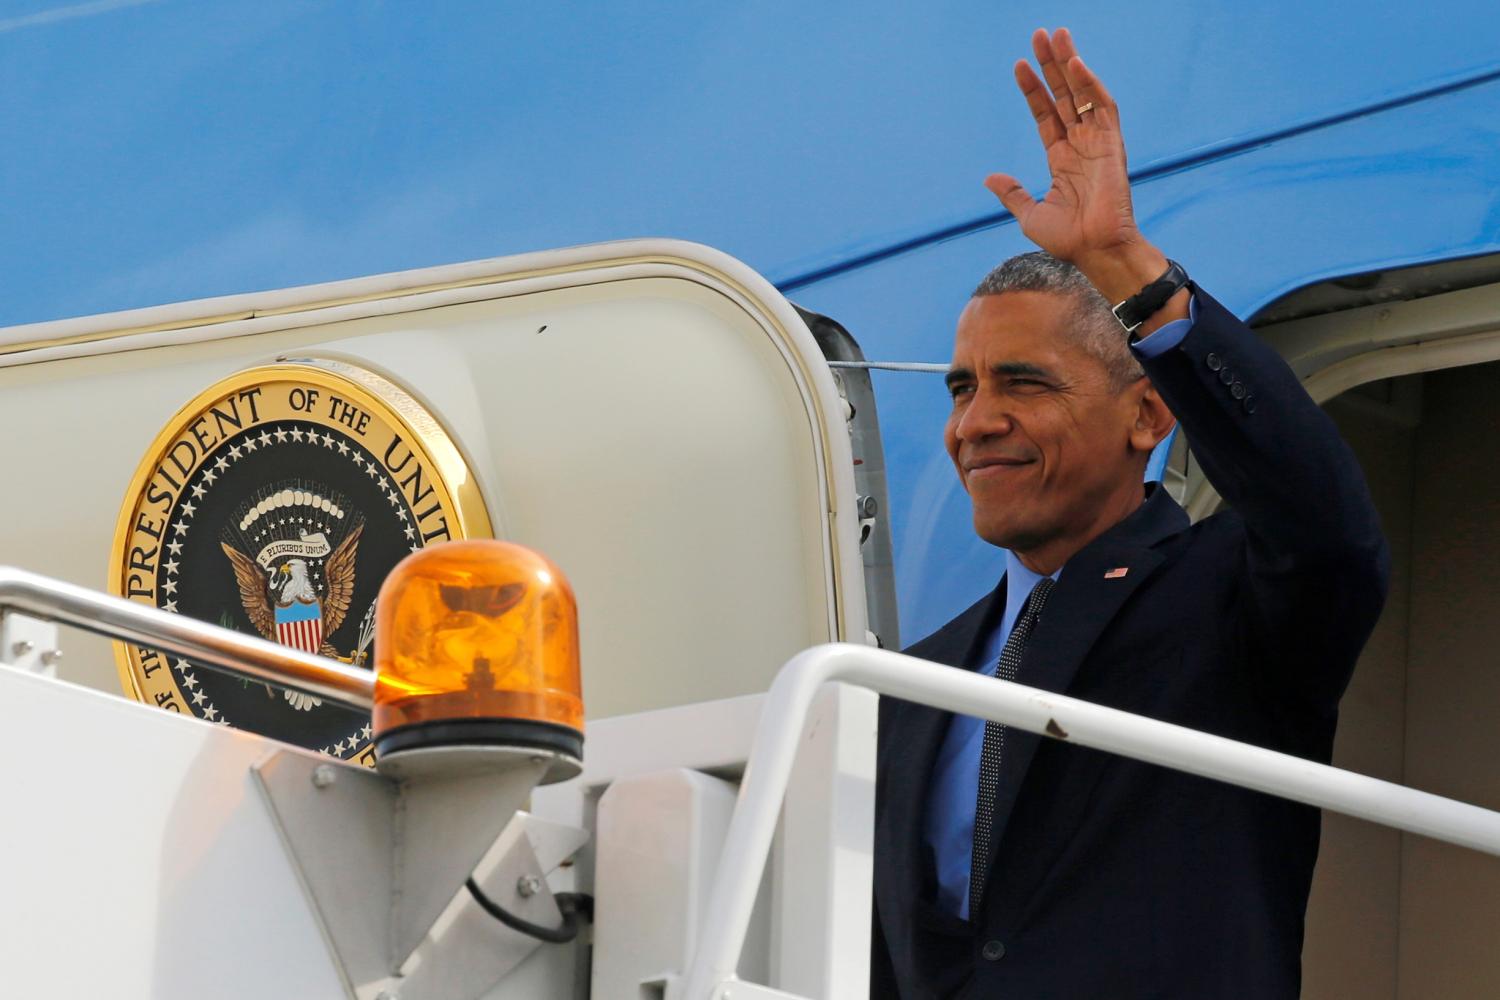 U.S. President Barack Obama waves as he arrives aboard Air Force One at O'Hare International Airport in Chicago, Illinois, U.S. October 7, 2016. REUTERS/Jonathan Ernst - RTSR9MC